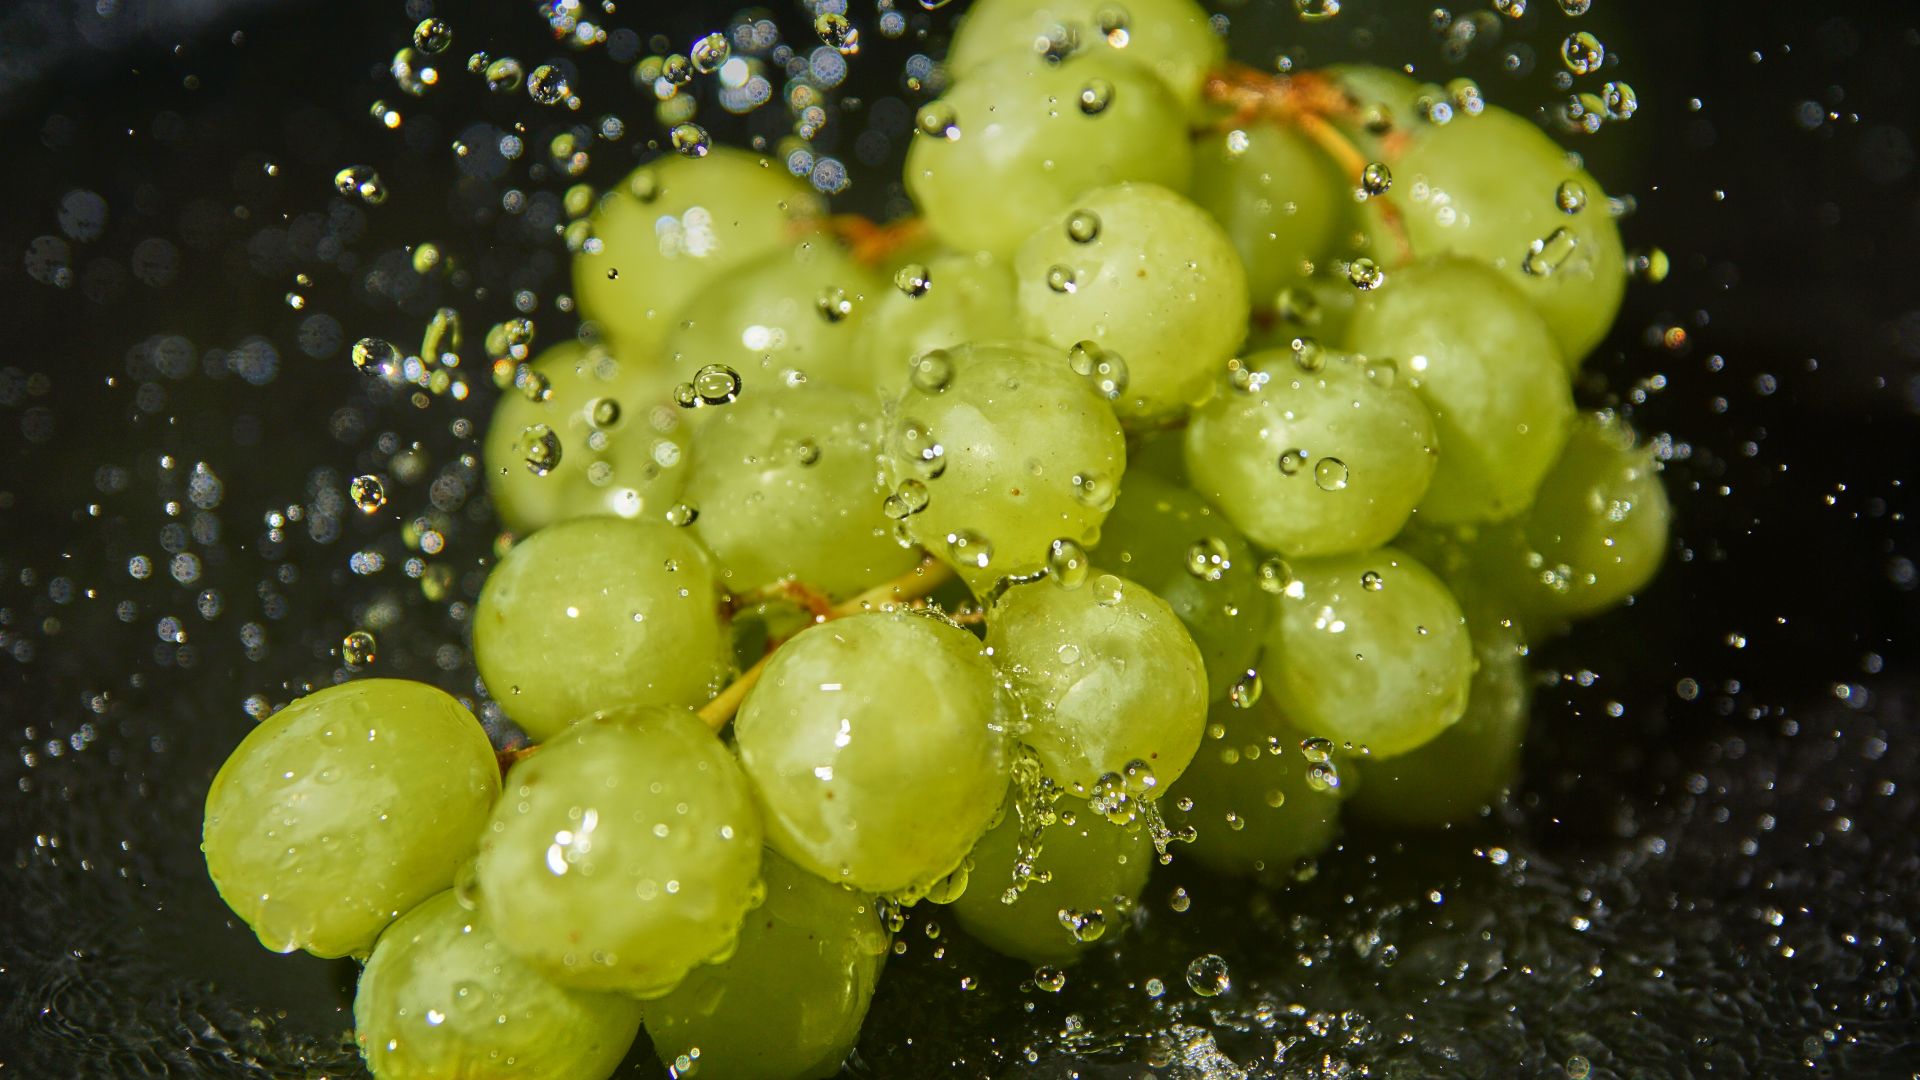 Desktop Wallpaper Green Grapes, Fruits, Water Drops, Hd Image, Picture,  Background, 9f768a